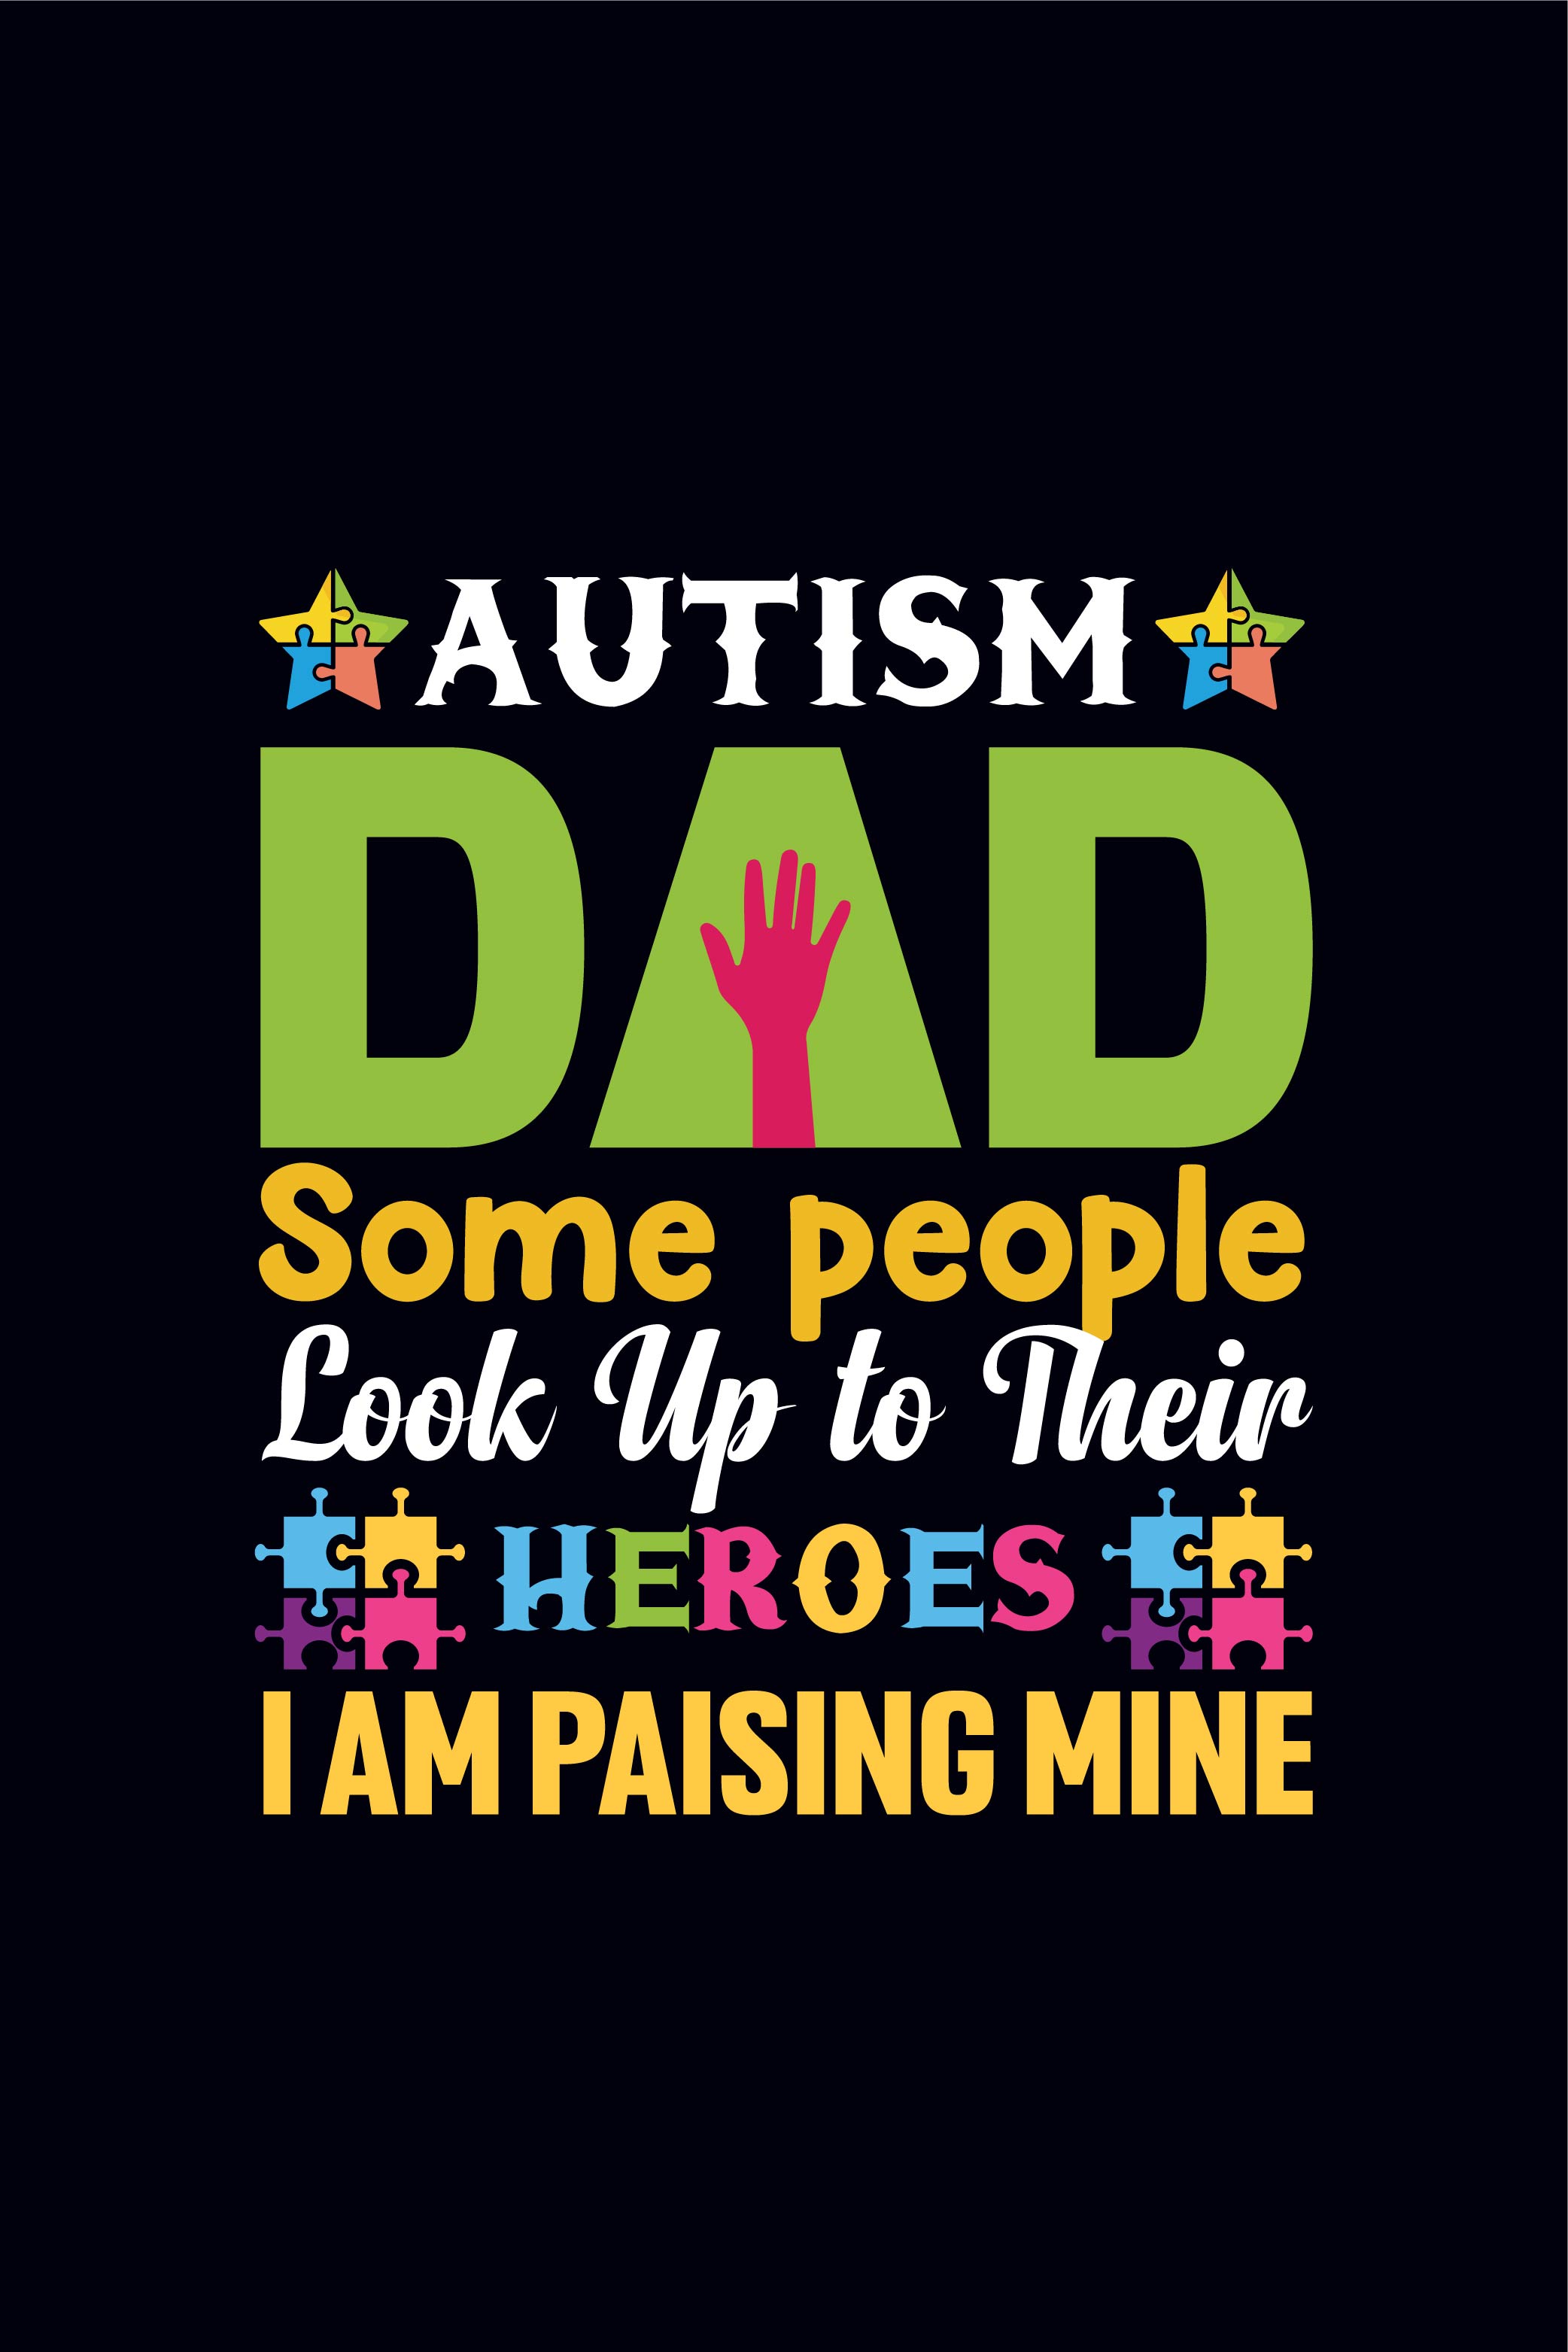 Autism dad Some people look up their heroes, I am paising mine Autism t-shirt design template pinterest preview image.